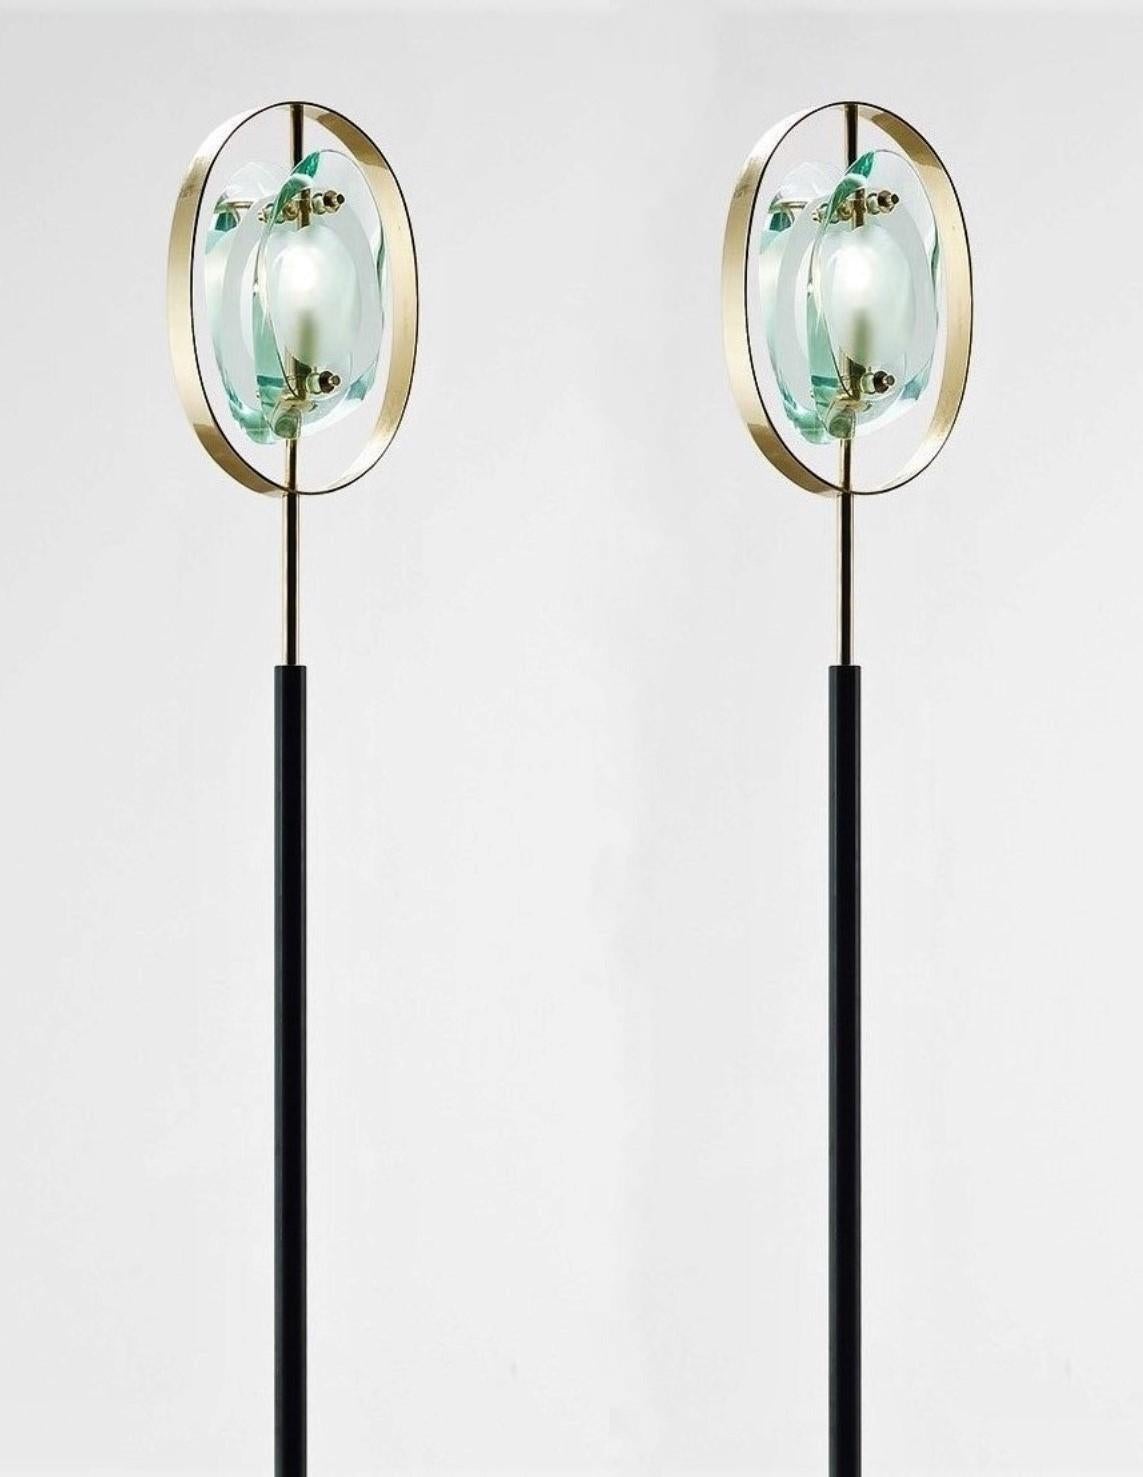 Mid-Century Modern Pair of Max Ingrand Floor Lamps for Fontana Arte Model 2020, Italy, 1961 For Sale